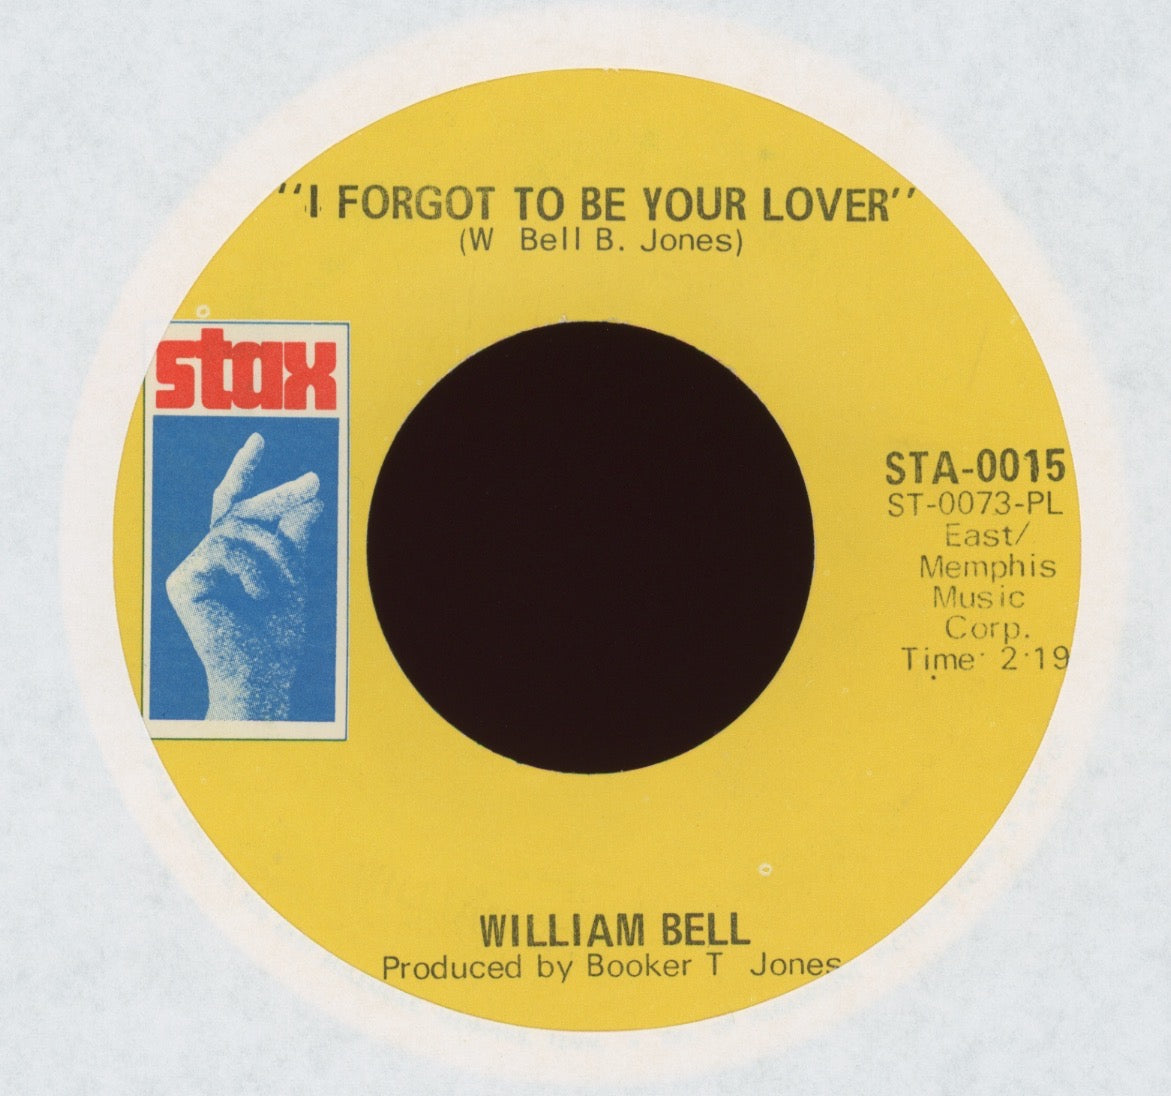 William Bell - I Forgot To Be Your Lover on Stax Samples